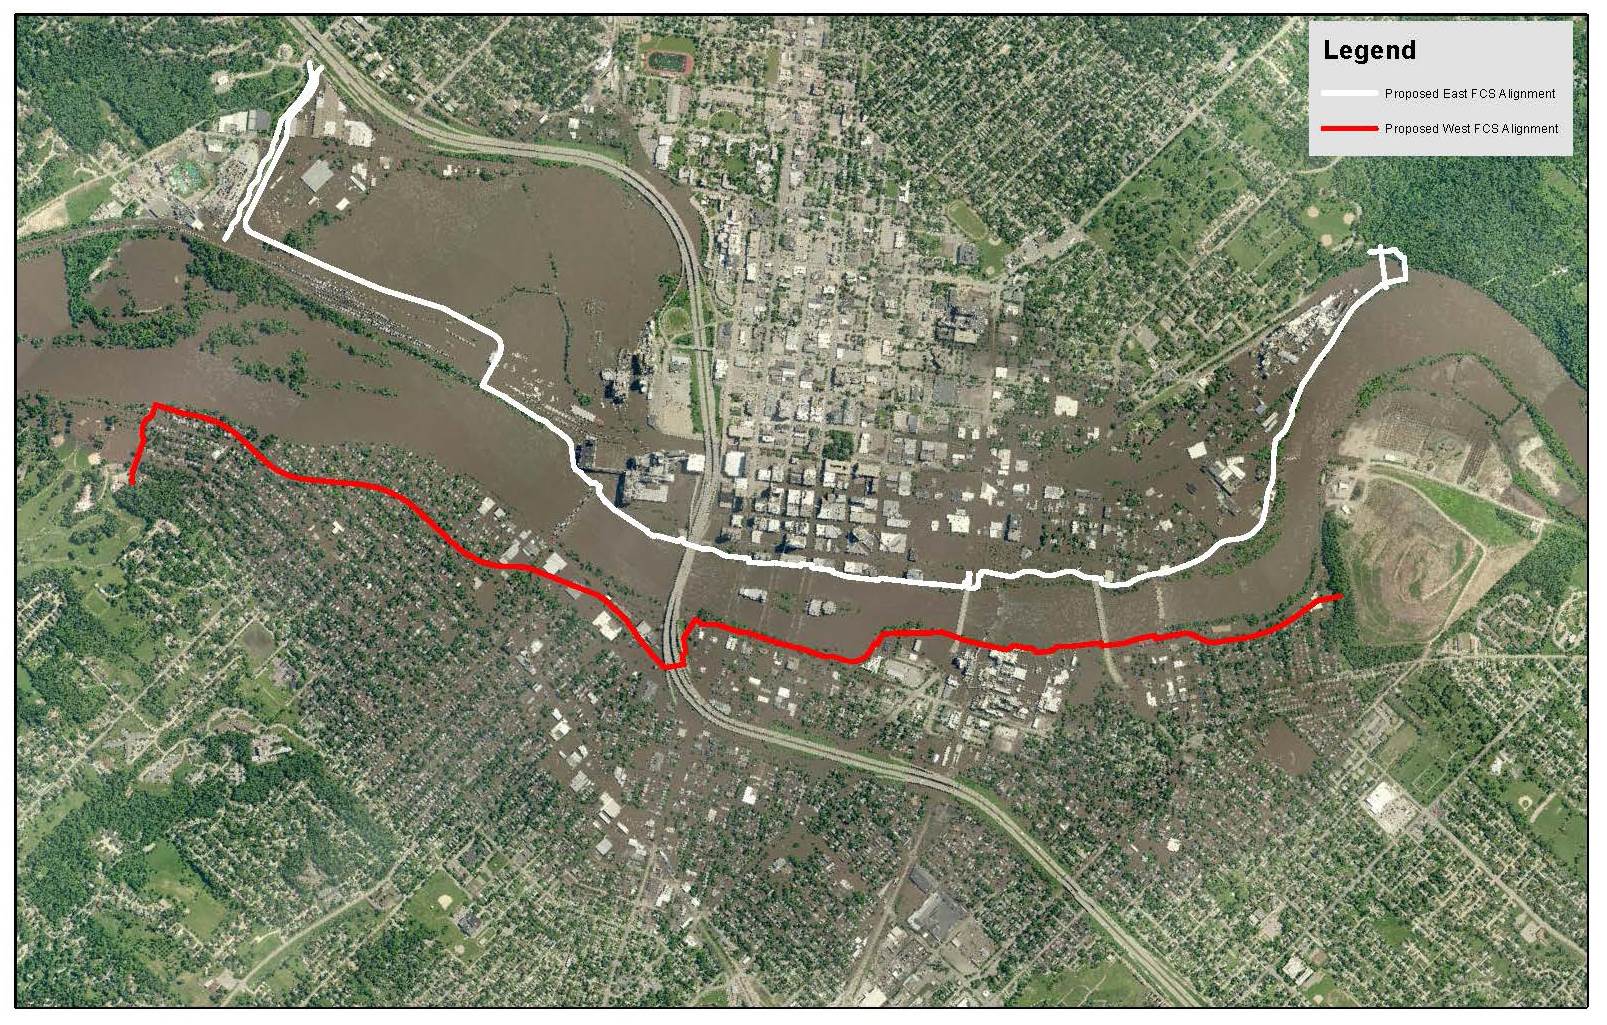 Aerial map of Cedar Rapids with lines representing proposed new flood control system alignments